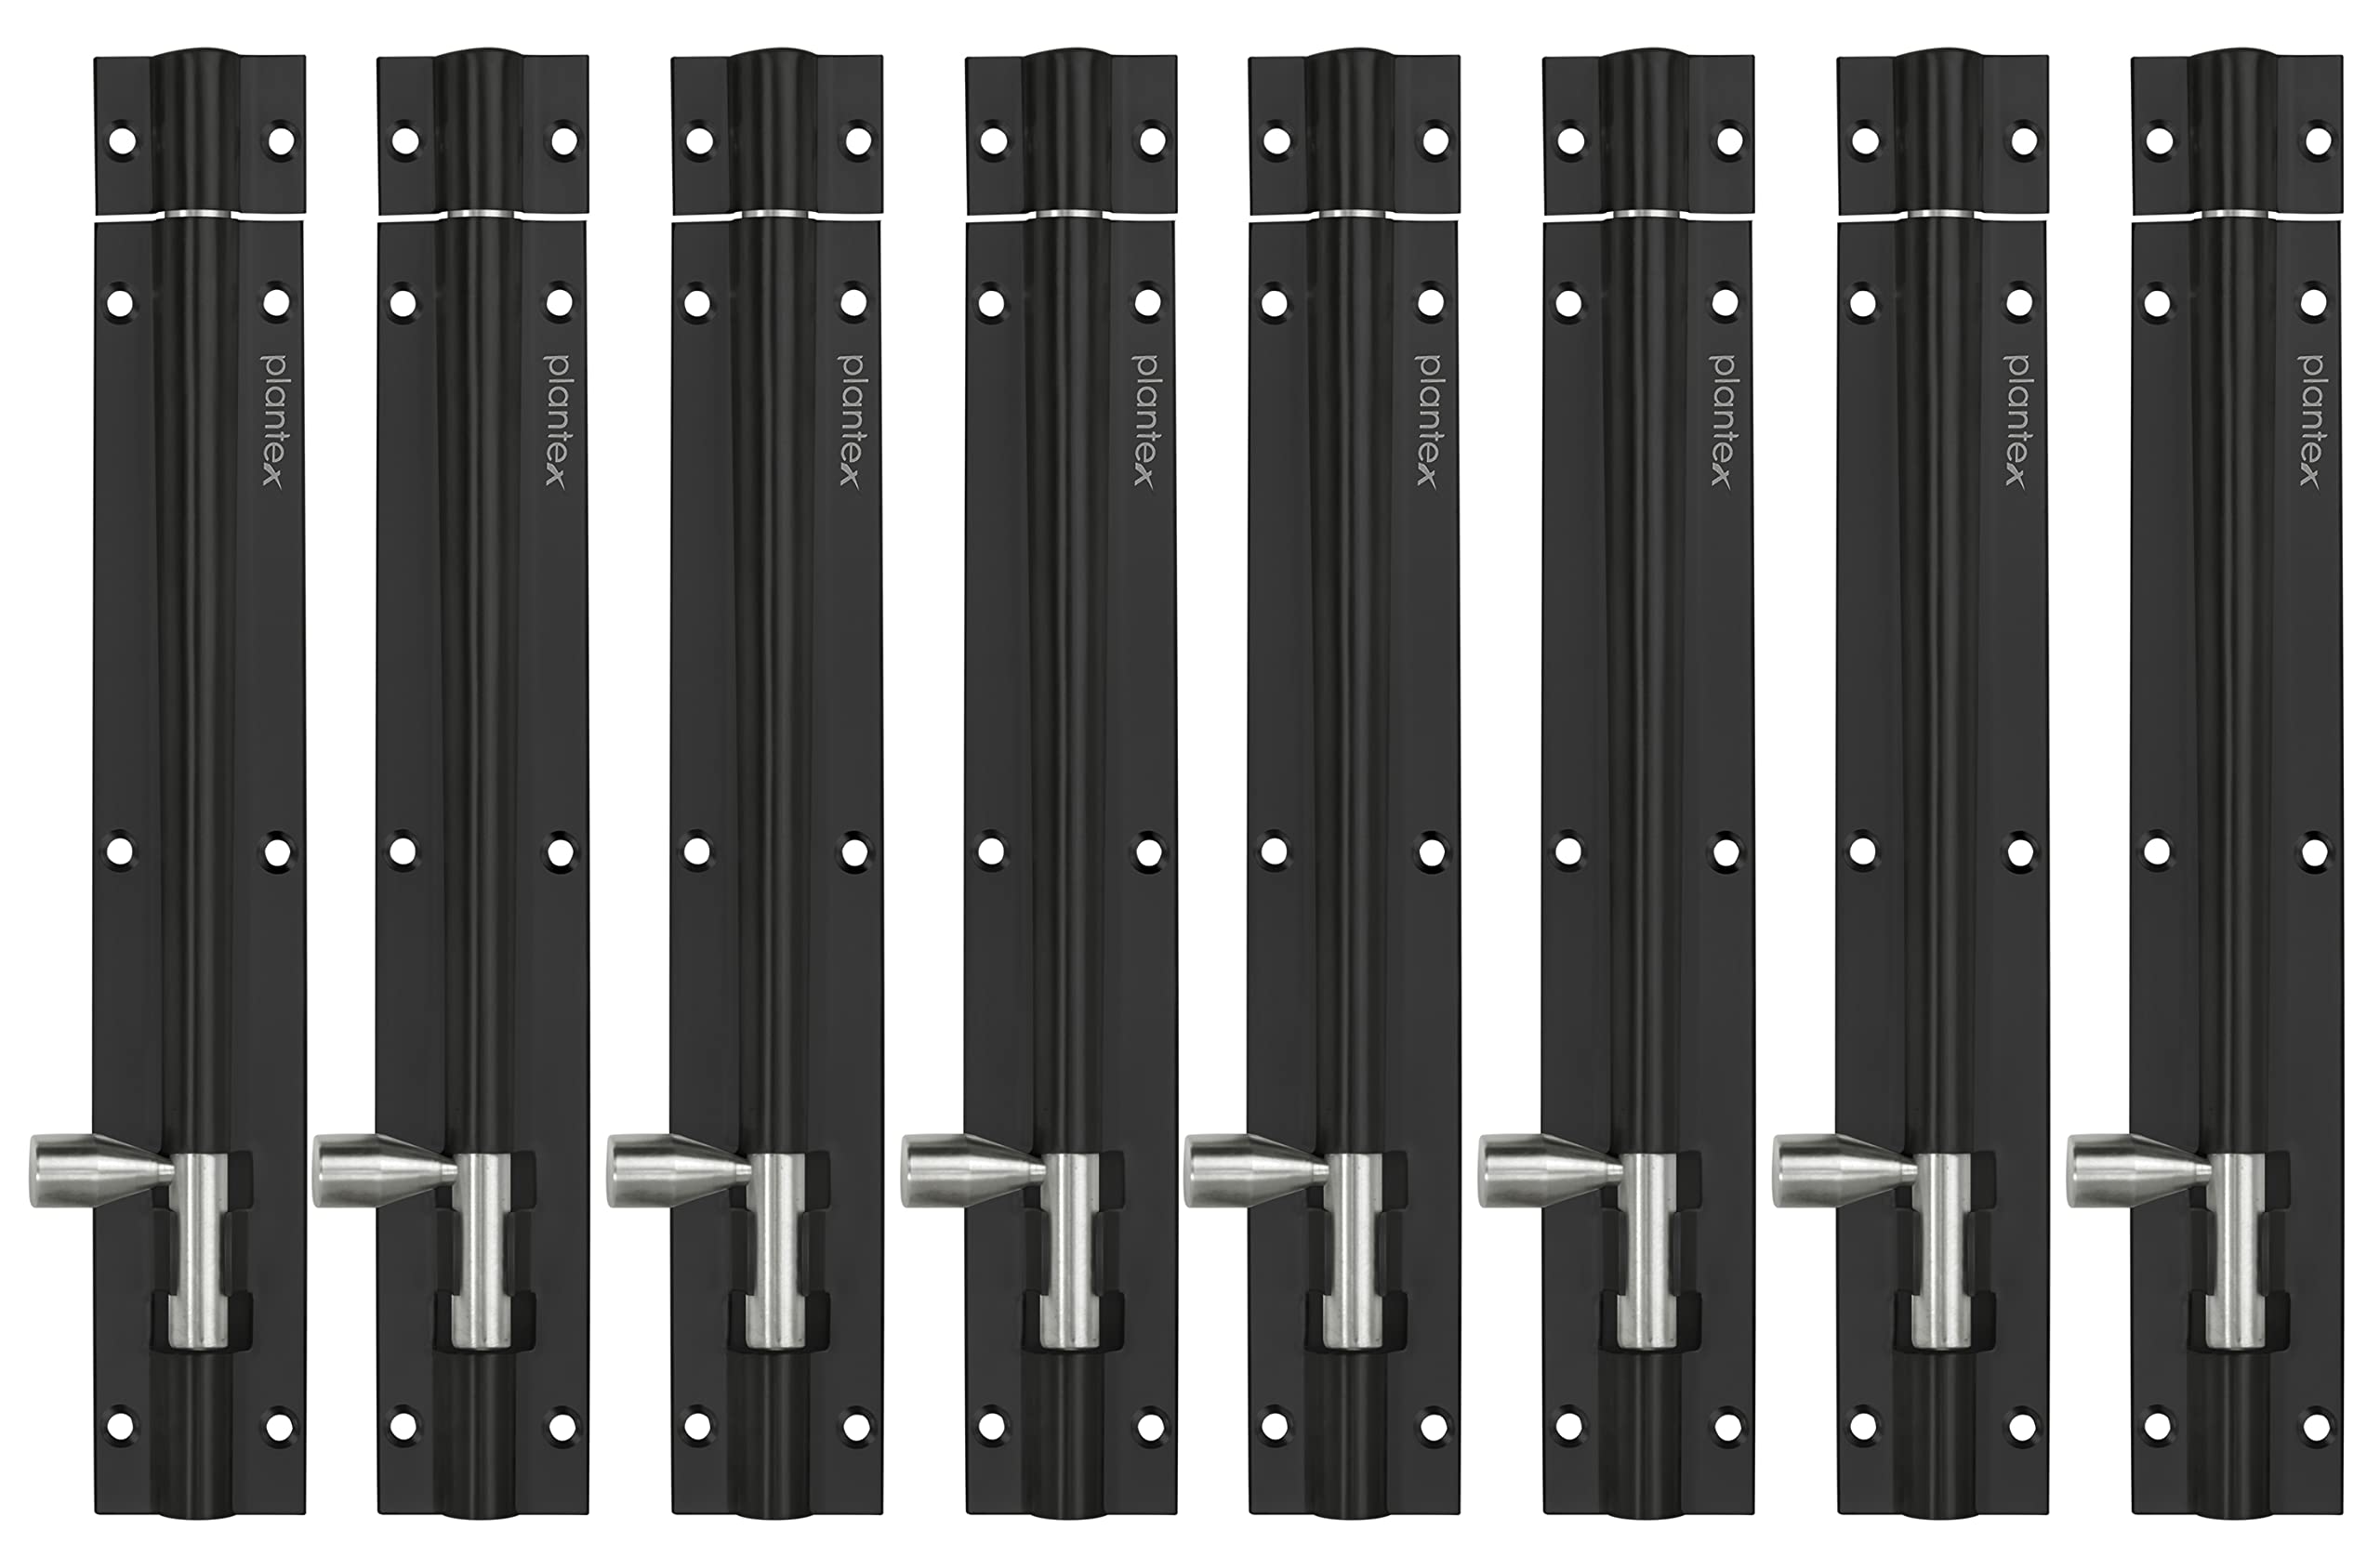 Plantex Joint-Less Tower Bolt for Door - 8- inches Long Latch - Pack of 8 (Multicolour)